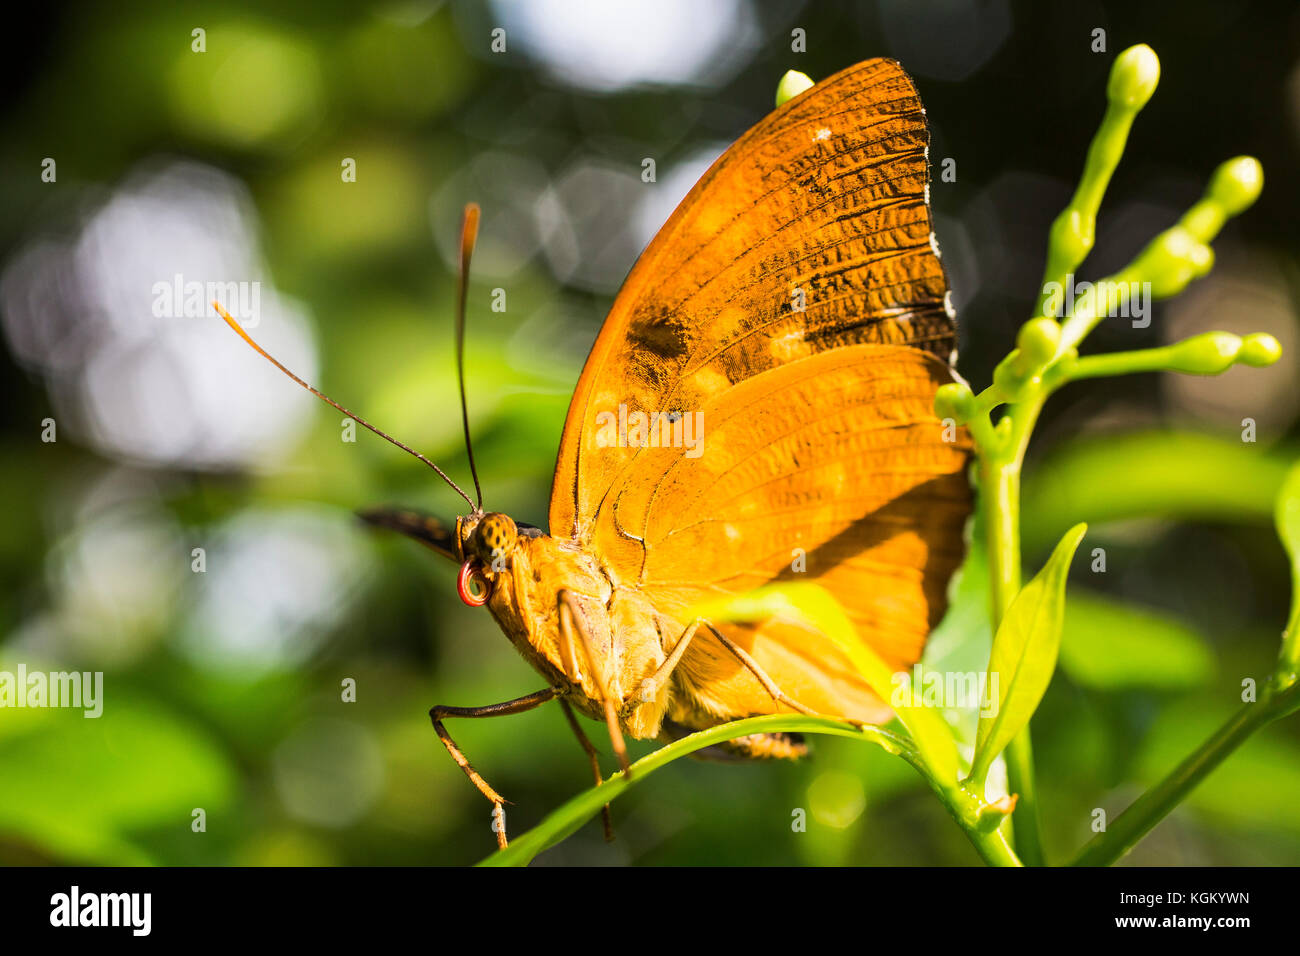 Close-up of yellow butterfly on plant Stock Photo